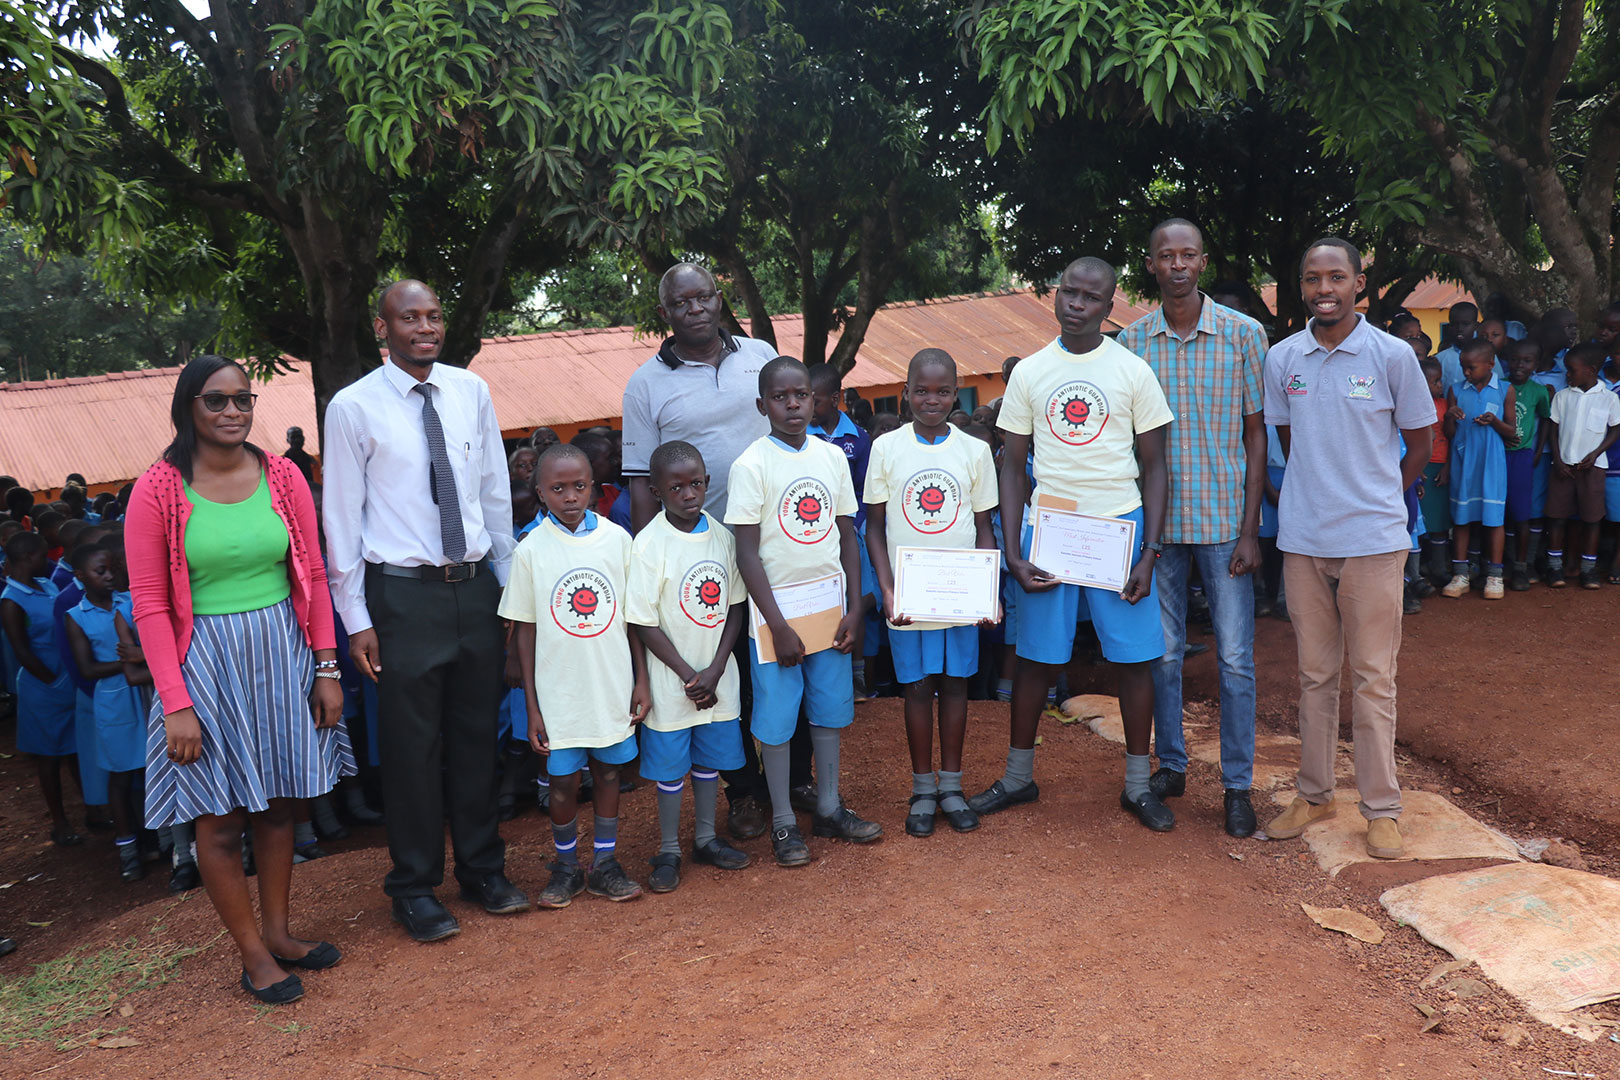 Makerere University School of Public Health awards winners of Schools’ Antimicrobial Resistance Awareness Competition